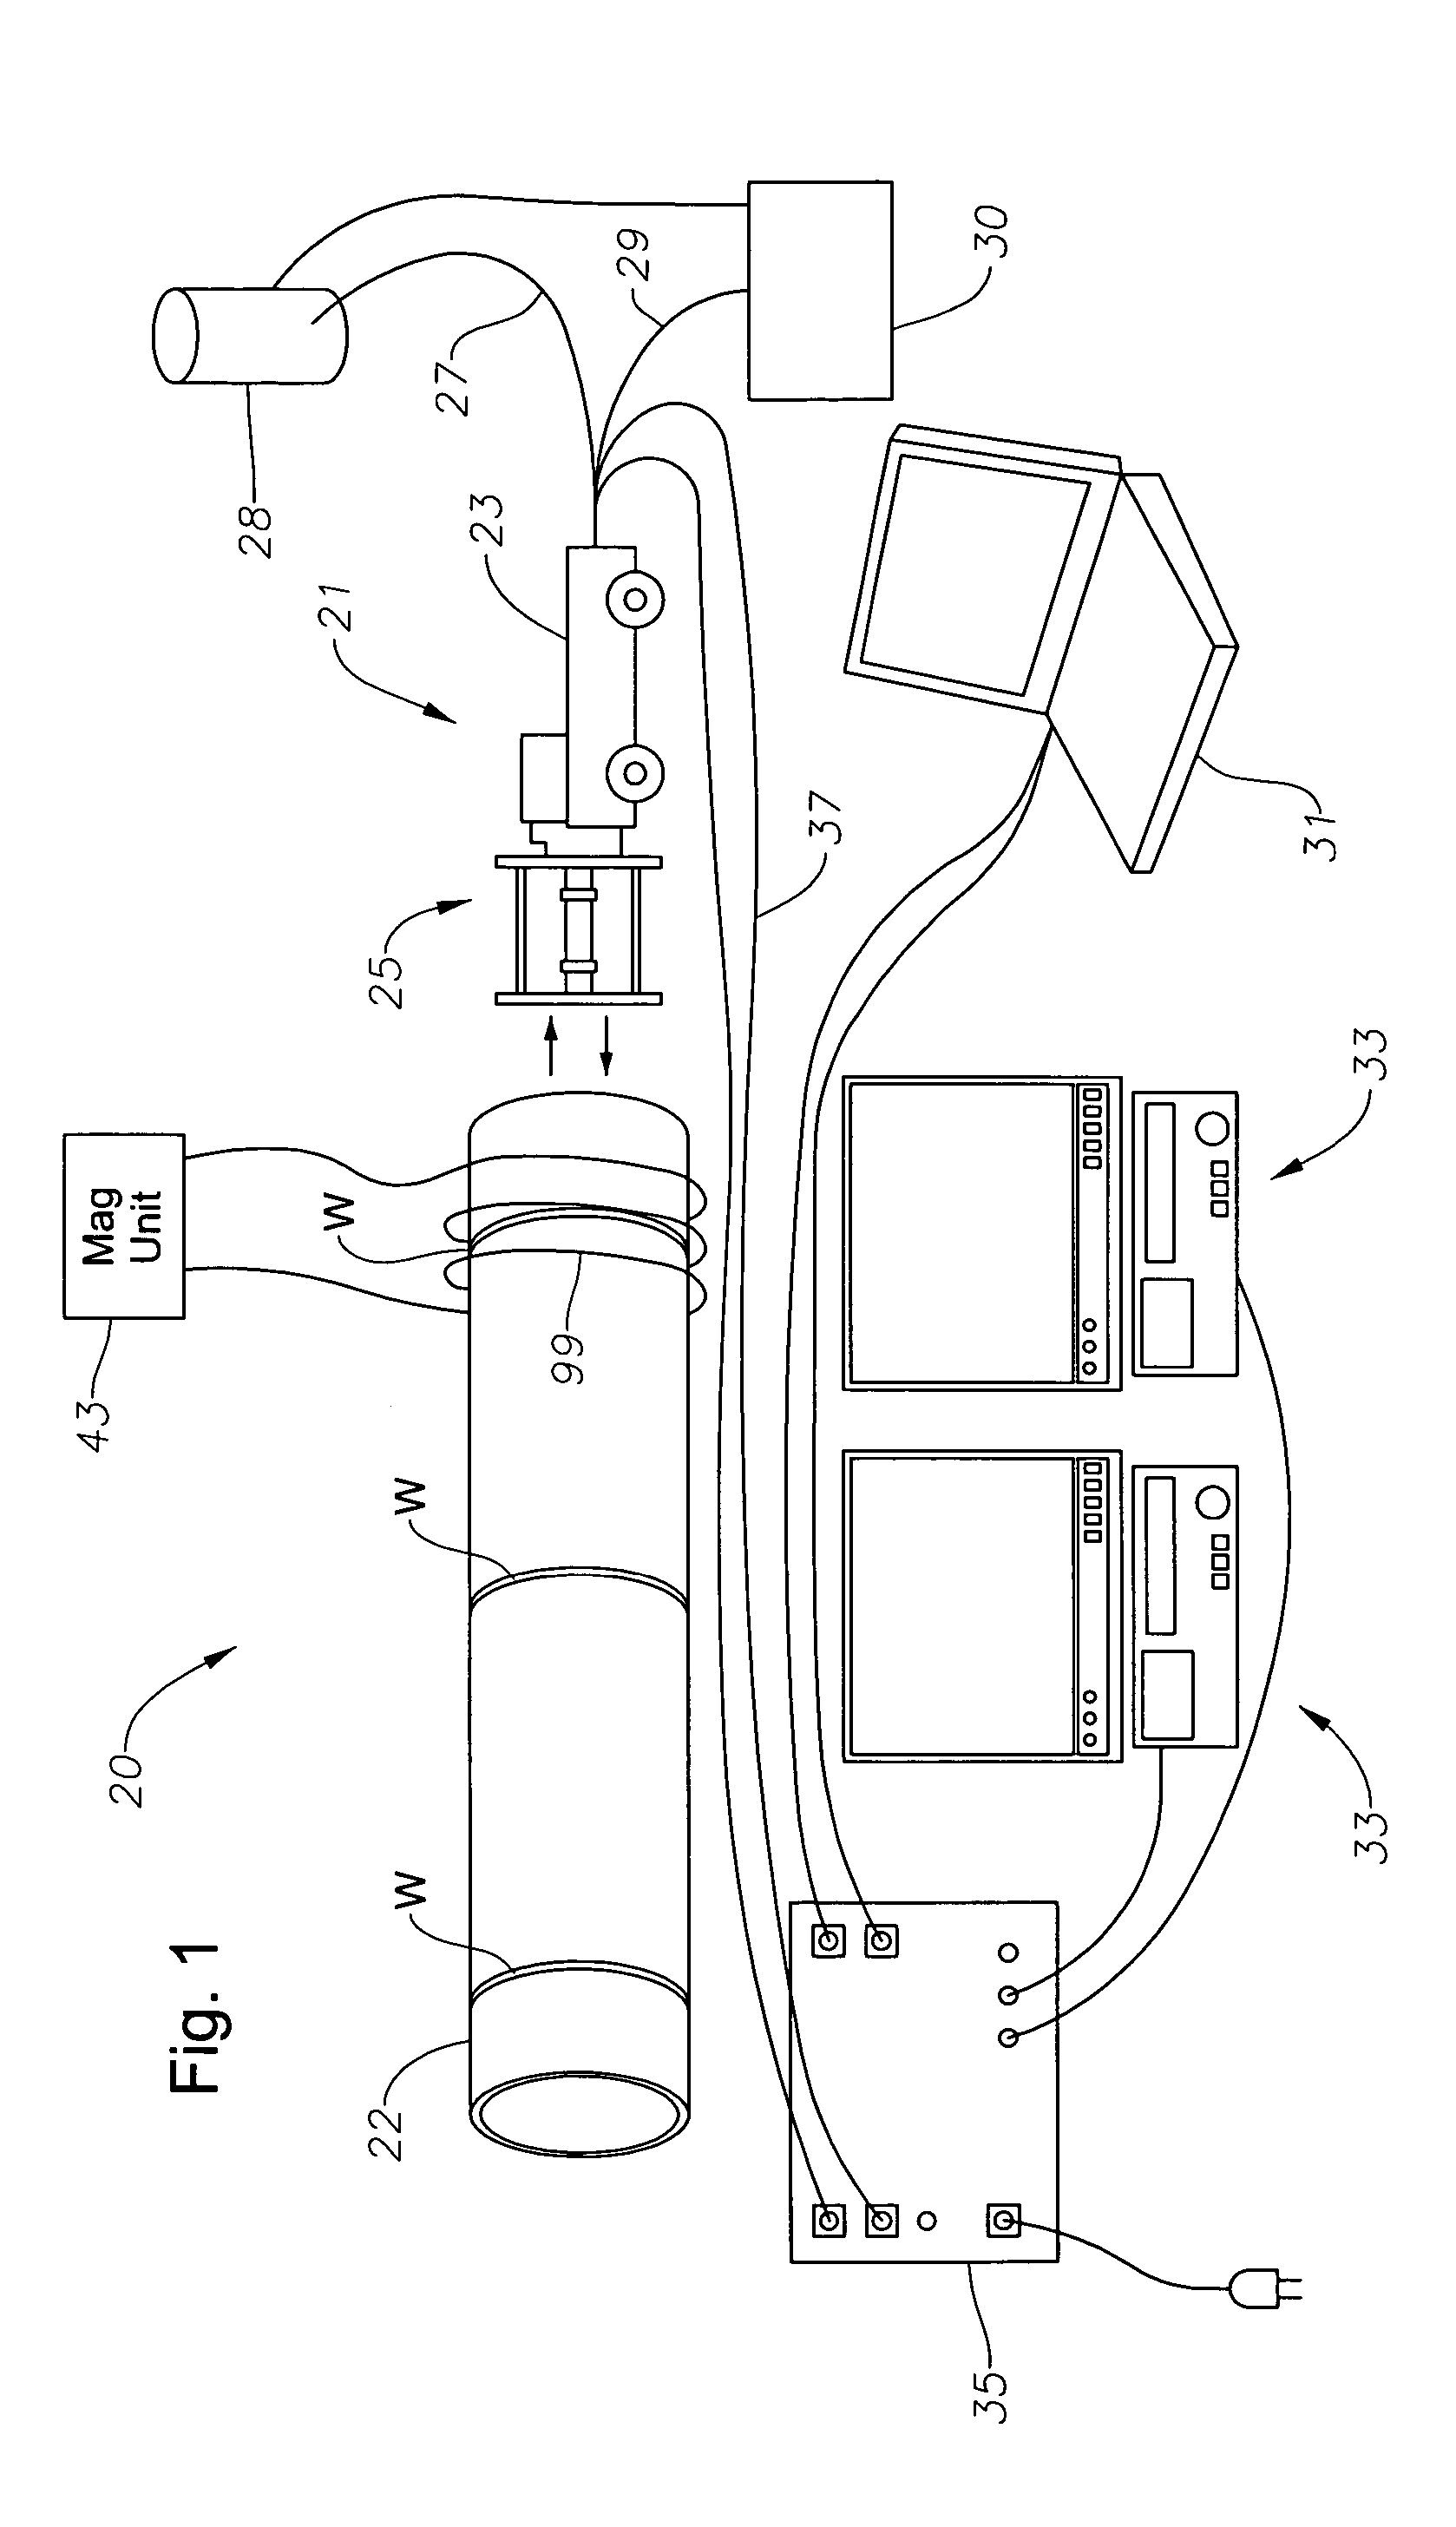 Internal riser inspection system, apparatus and methods of using same